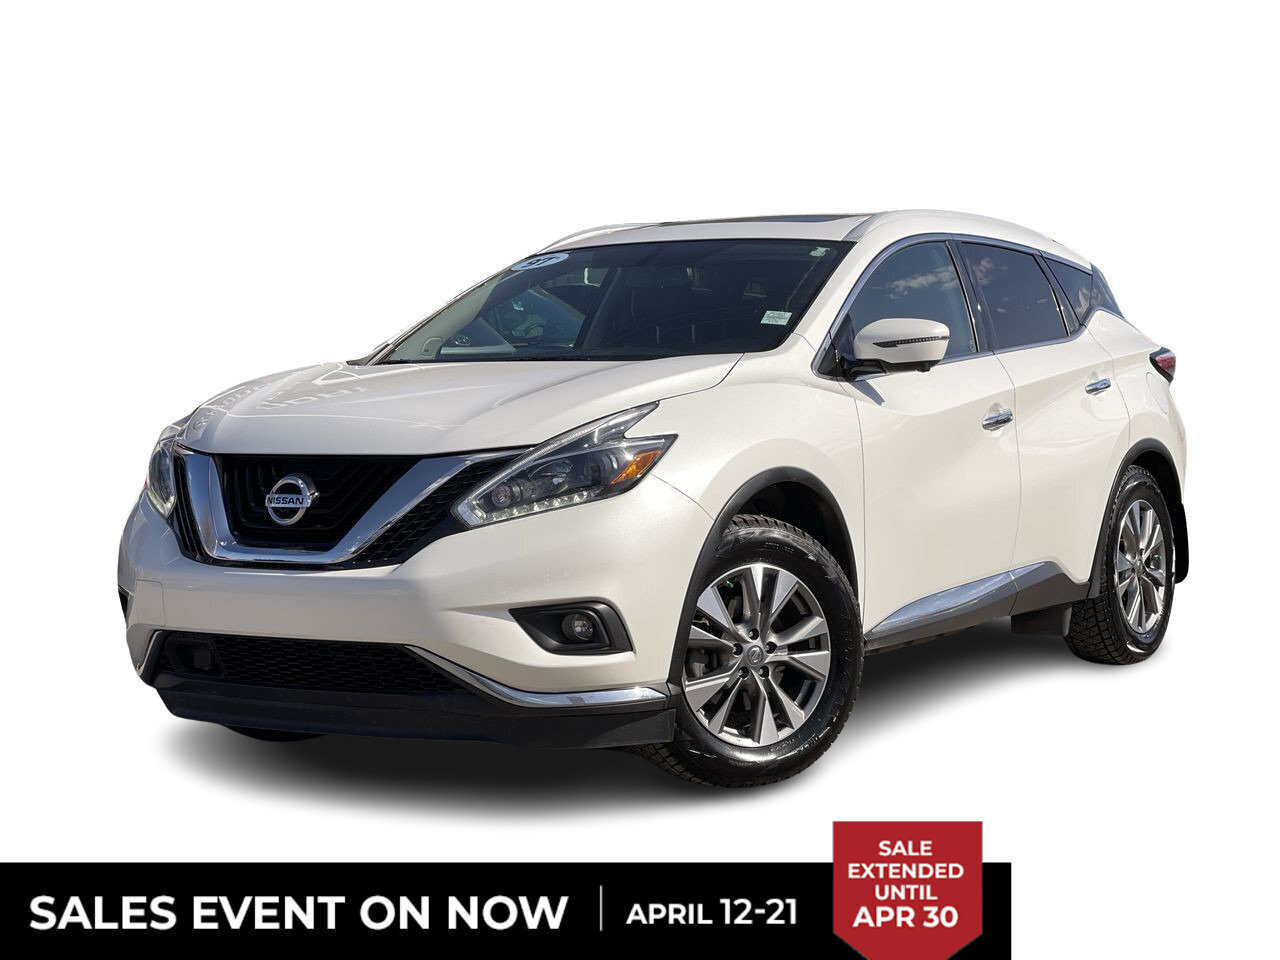 2018 Nissan Murano SL AWD CVT LOCAL TRADE | 2 SETS OF TIRES | LEATHER